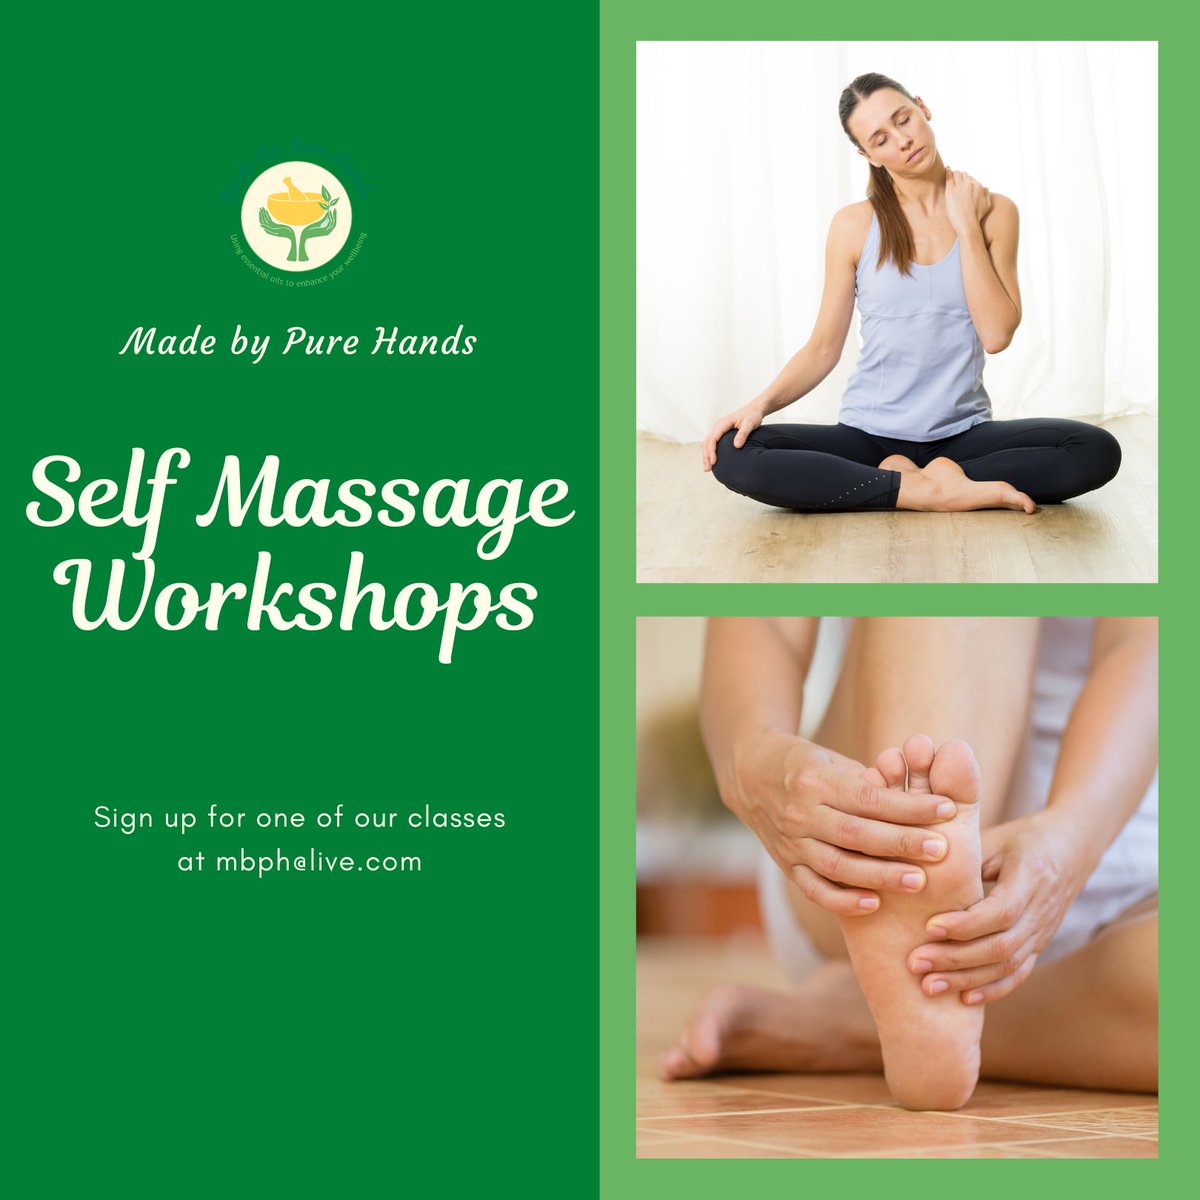 Don't forget to sign up to our Self massage Class on Friday.  This will be our last free class, from the 17th  July classes will be £5.
buff.ly/2AKS0PJ
#selfmassage #destresstime #fridayfun #tensionrelief #neckrelief #timeout #ilovemassage